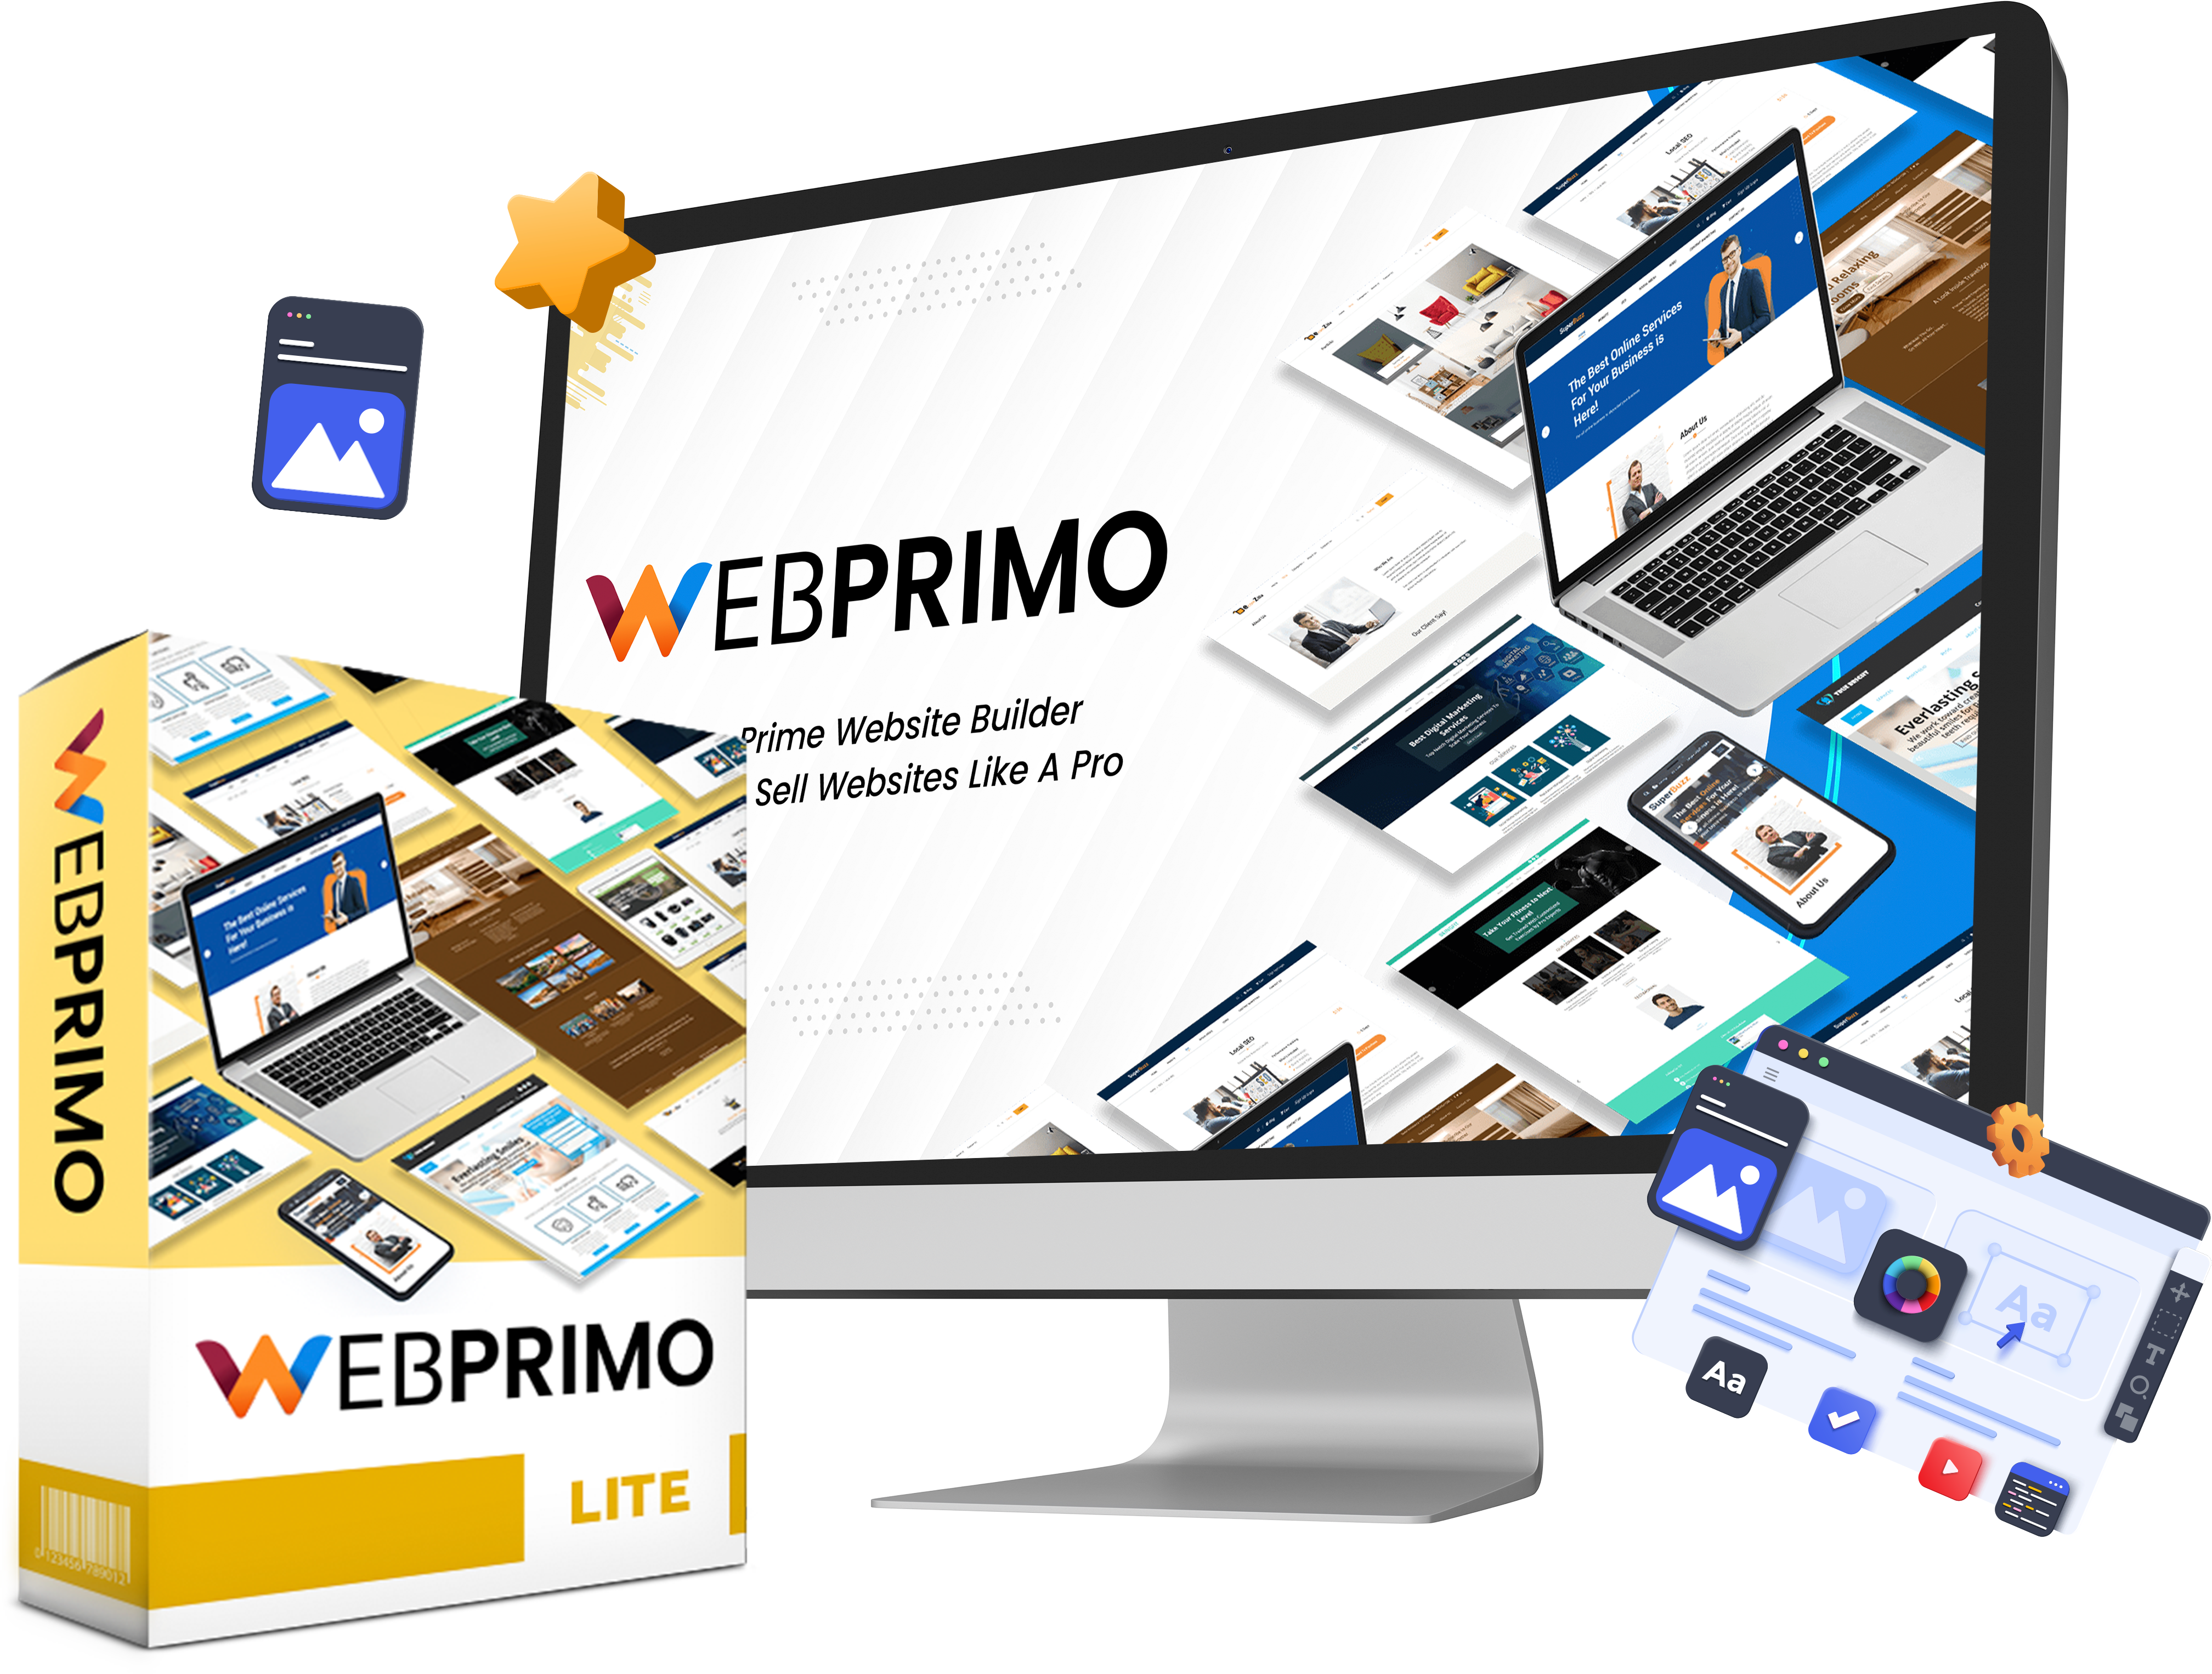 WebPrimo Review - Scan-Detects-Fixes for any niches